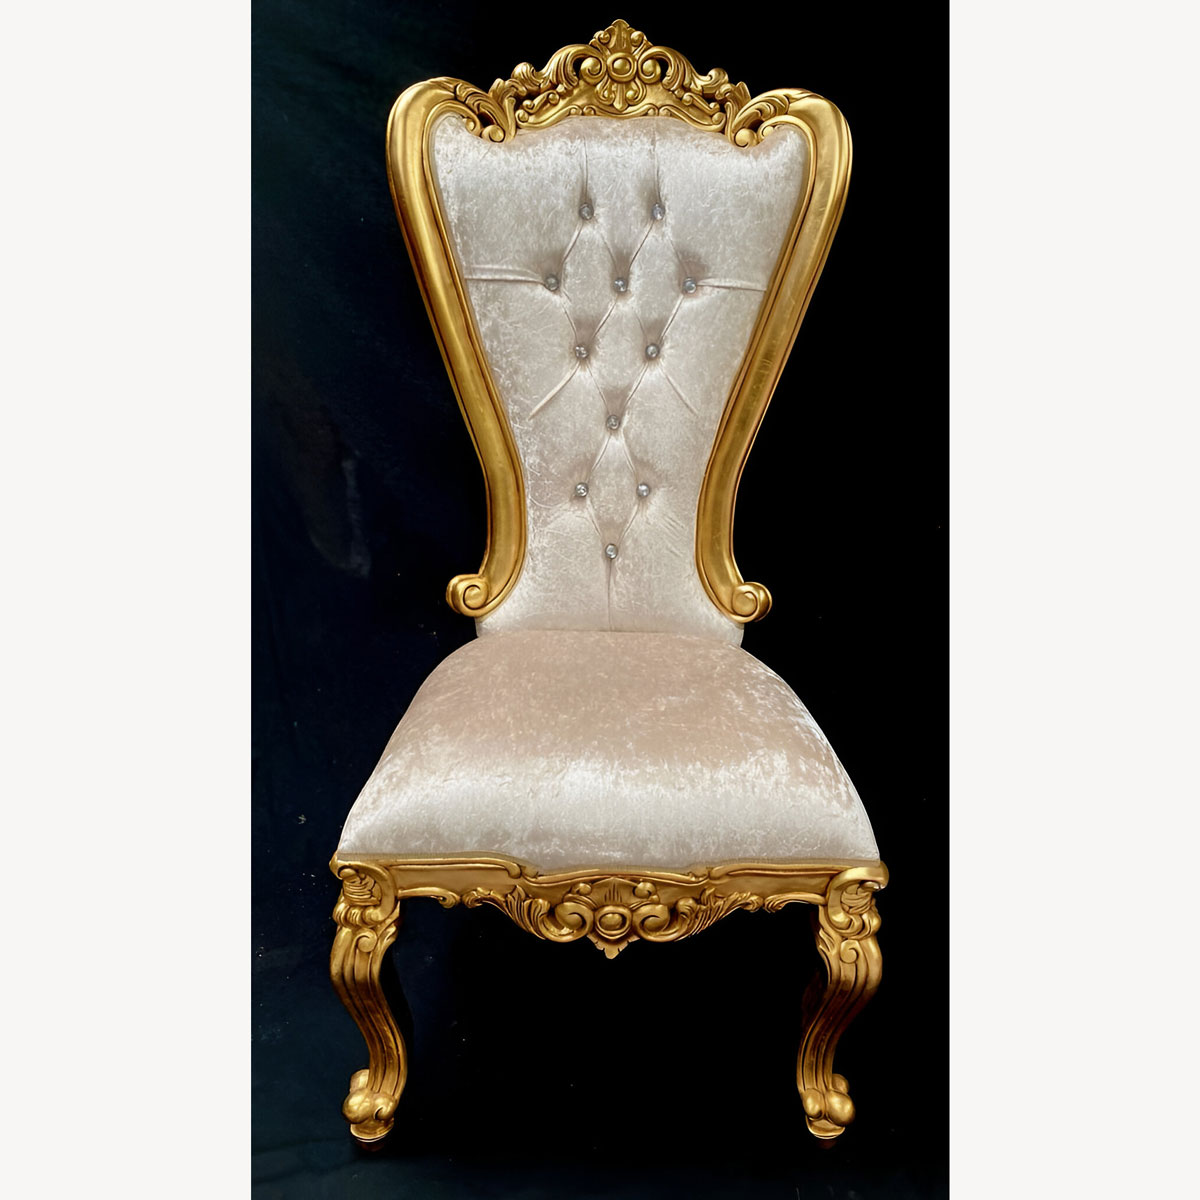 Mayfair Dining Wedding Side Throne In Gold Leaf Frame Upholstered In Ivory Cream Crushed Velvet With Crystal Buttoning 1 - Hampshire Barn Interiors - Mayfair Dining Wedding Side Throne In Gold Leaf Frame Upholstered In Ivory Cream Crushed Velvet With Crystal Buttoning -